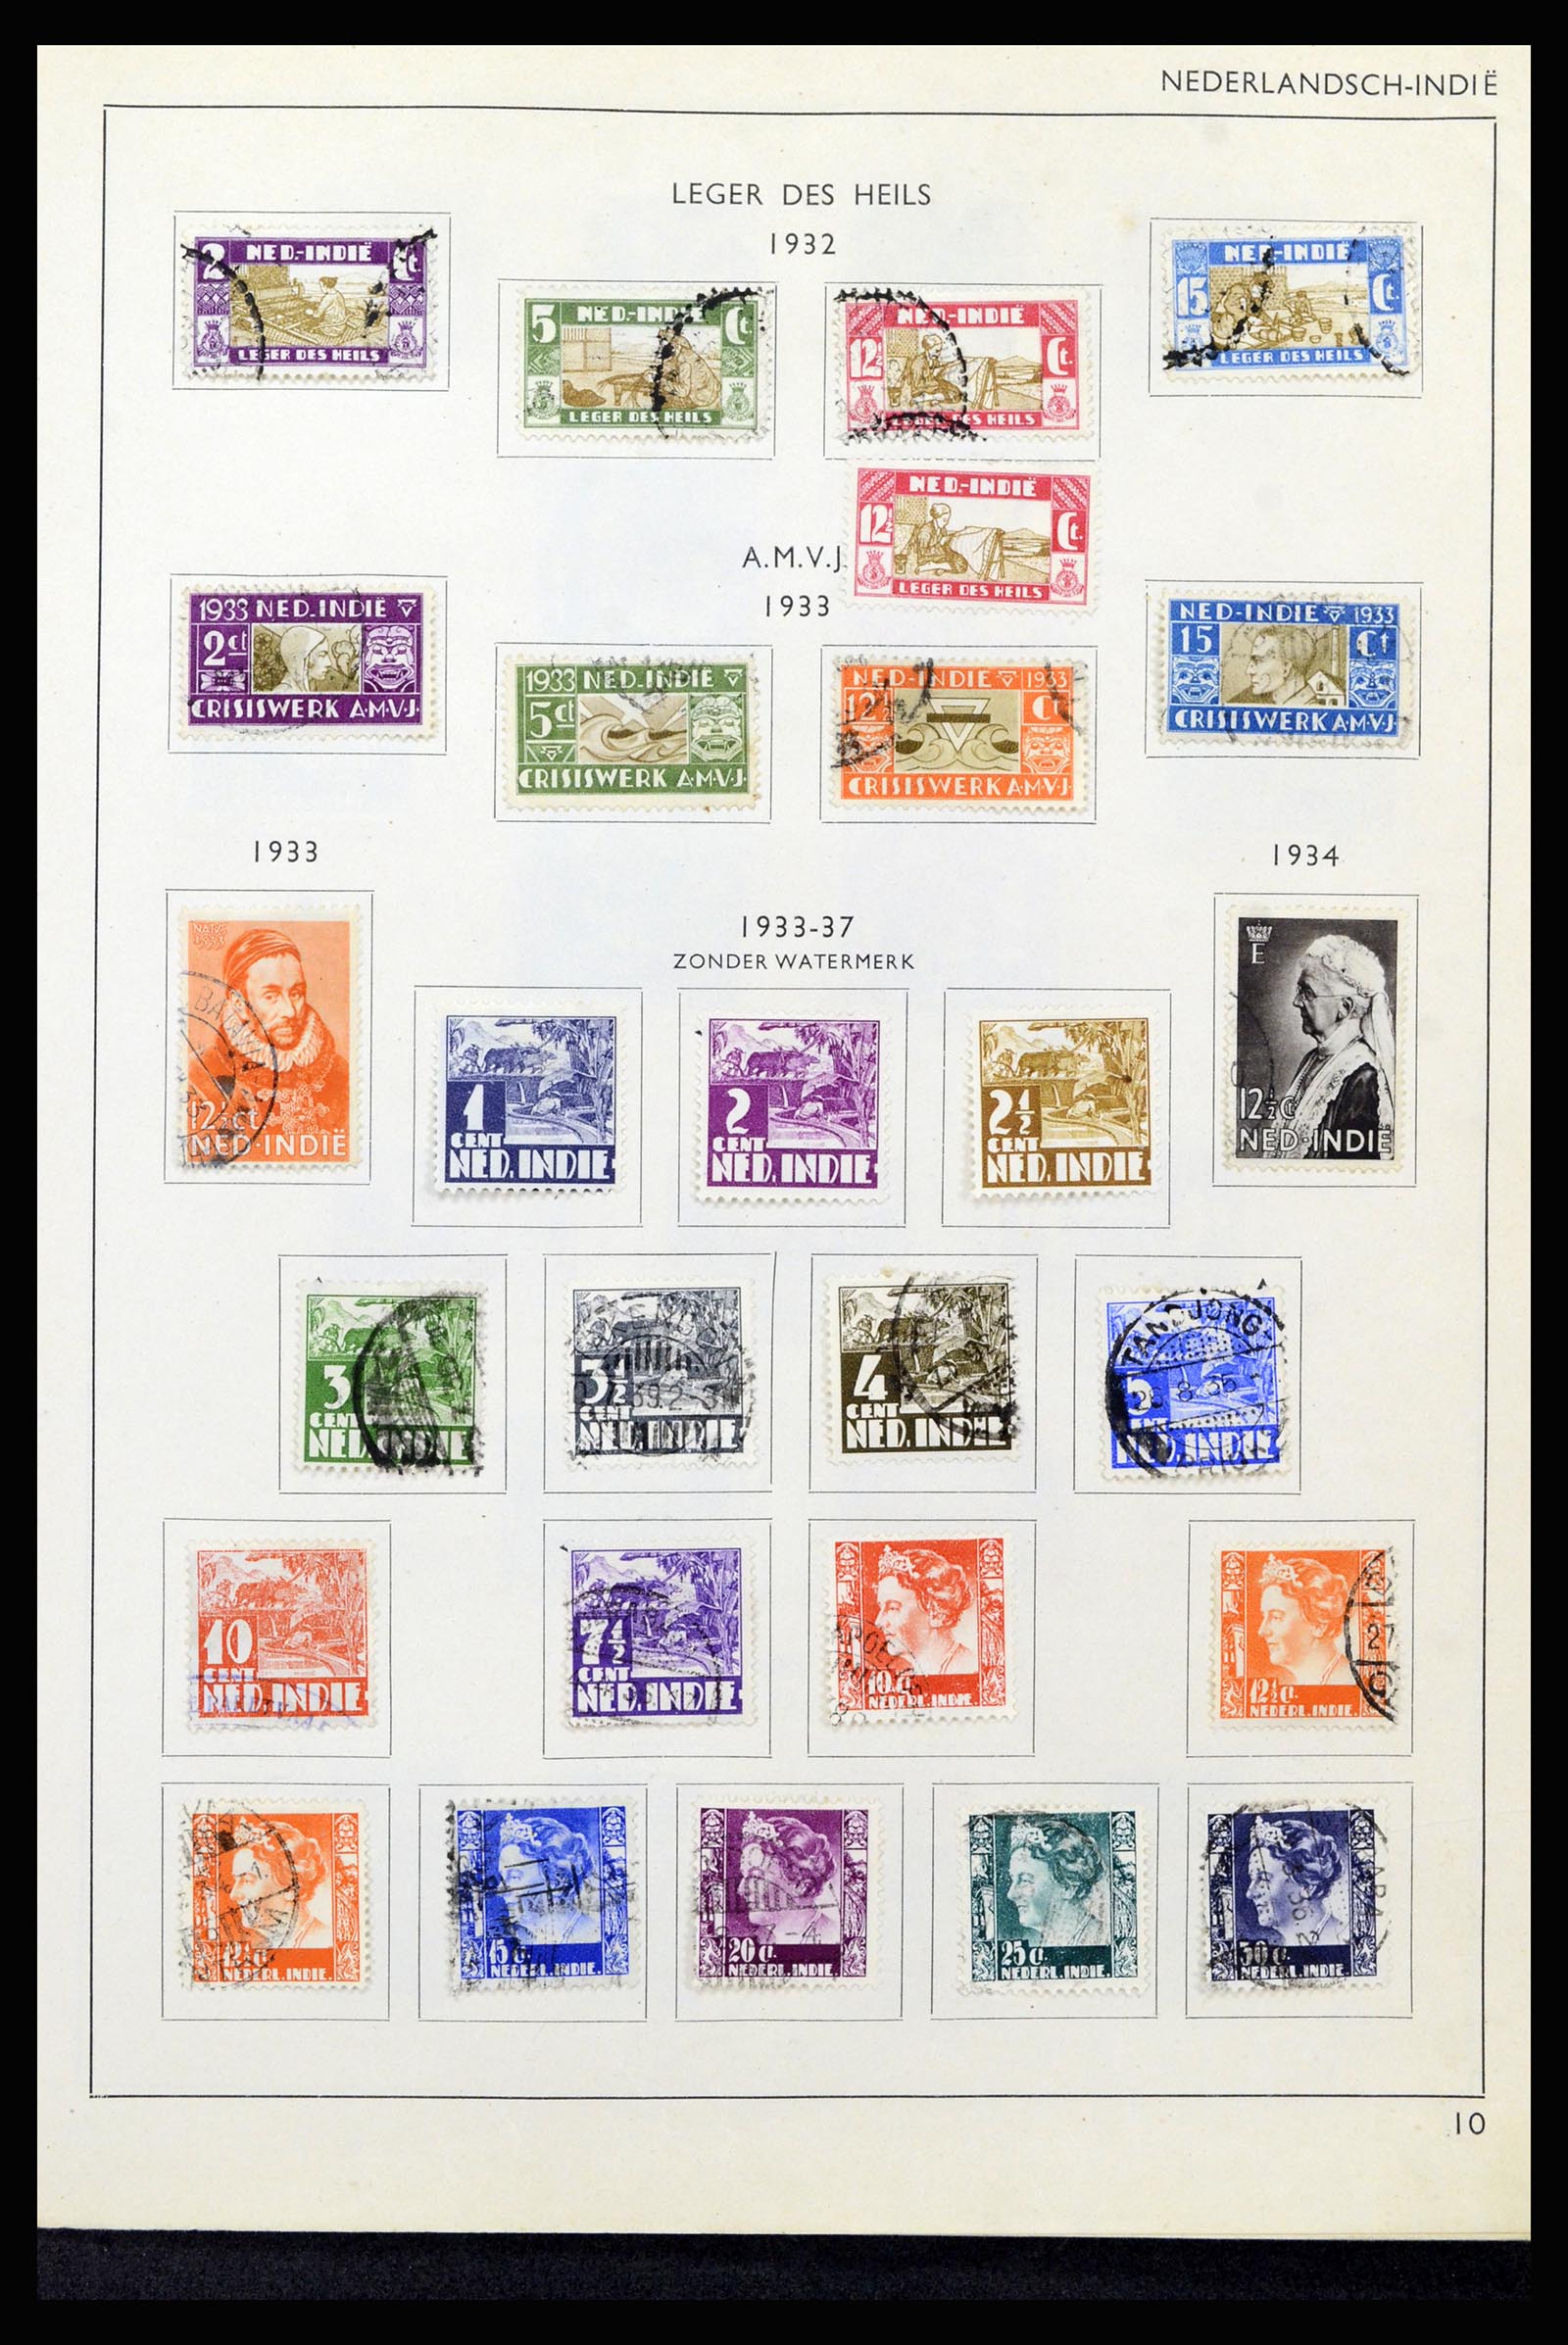 37217 010 - Stamp collection 37217 Dutch territories 1864-1975.